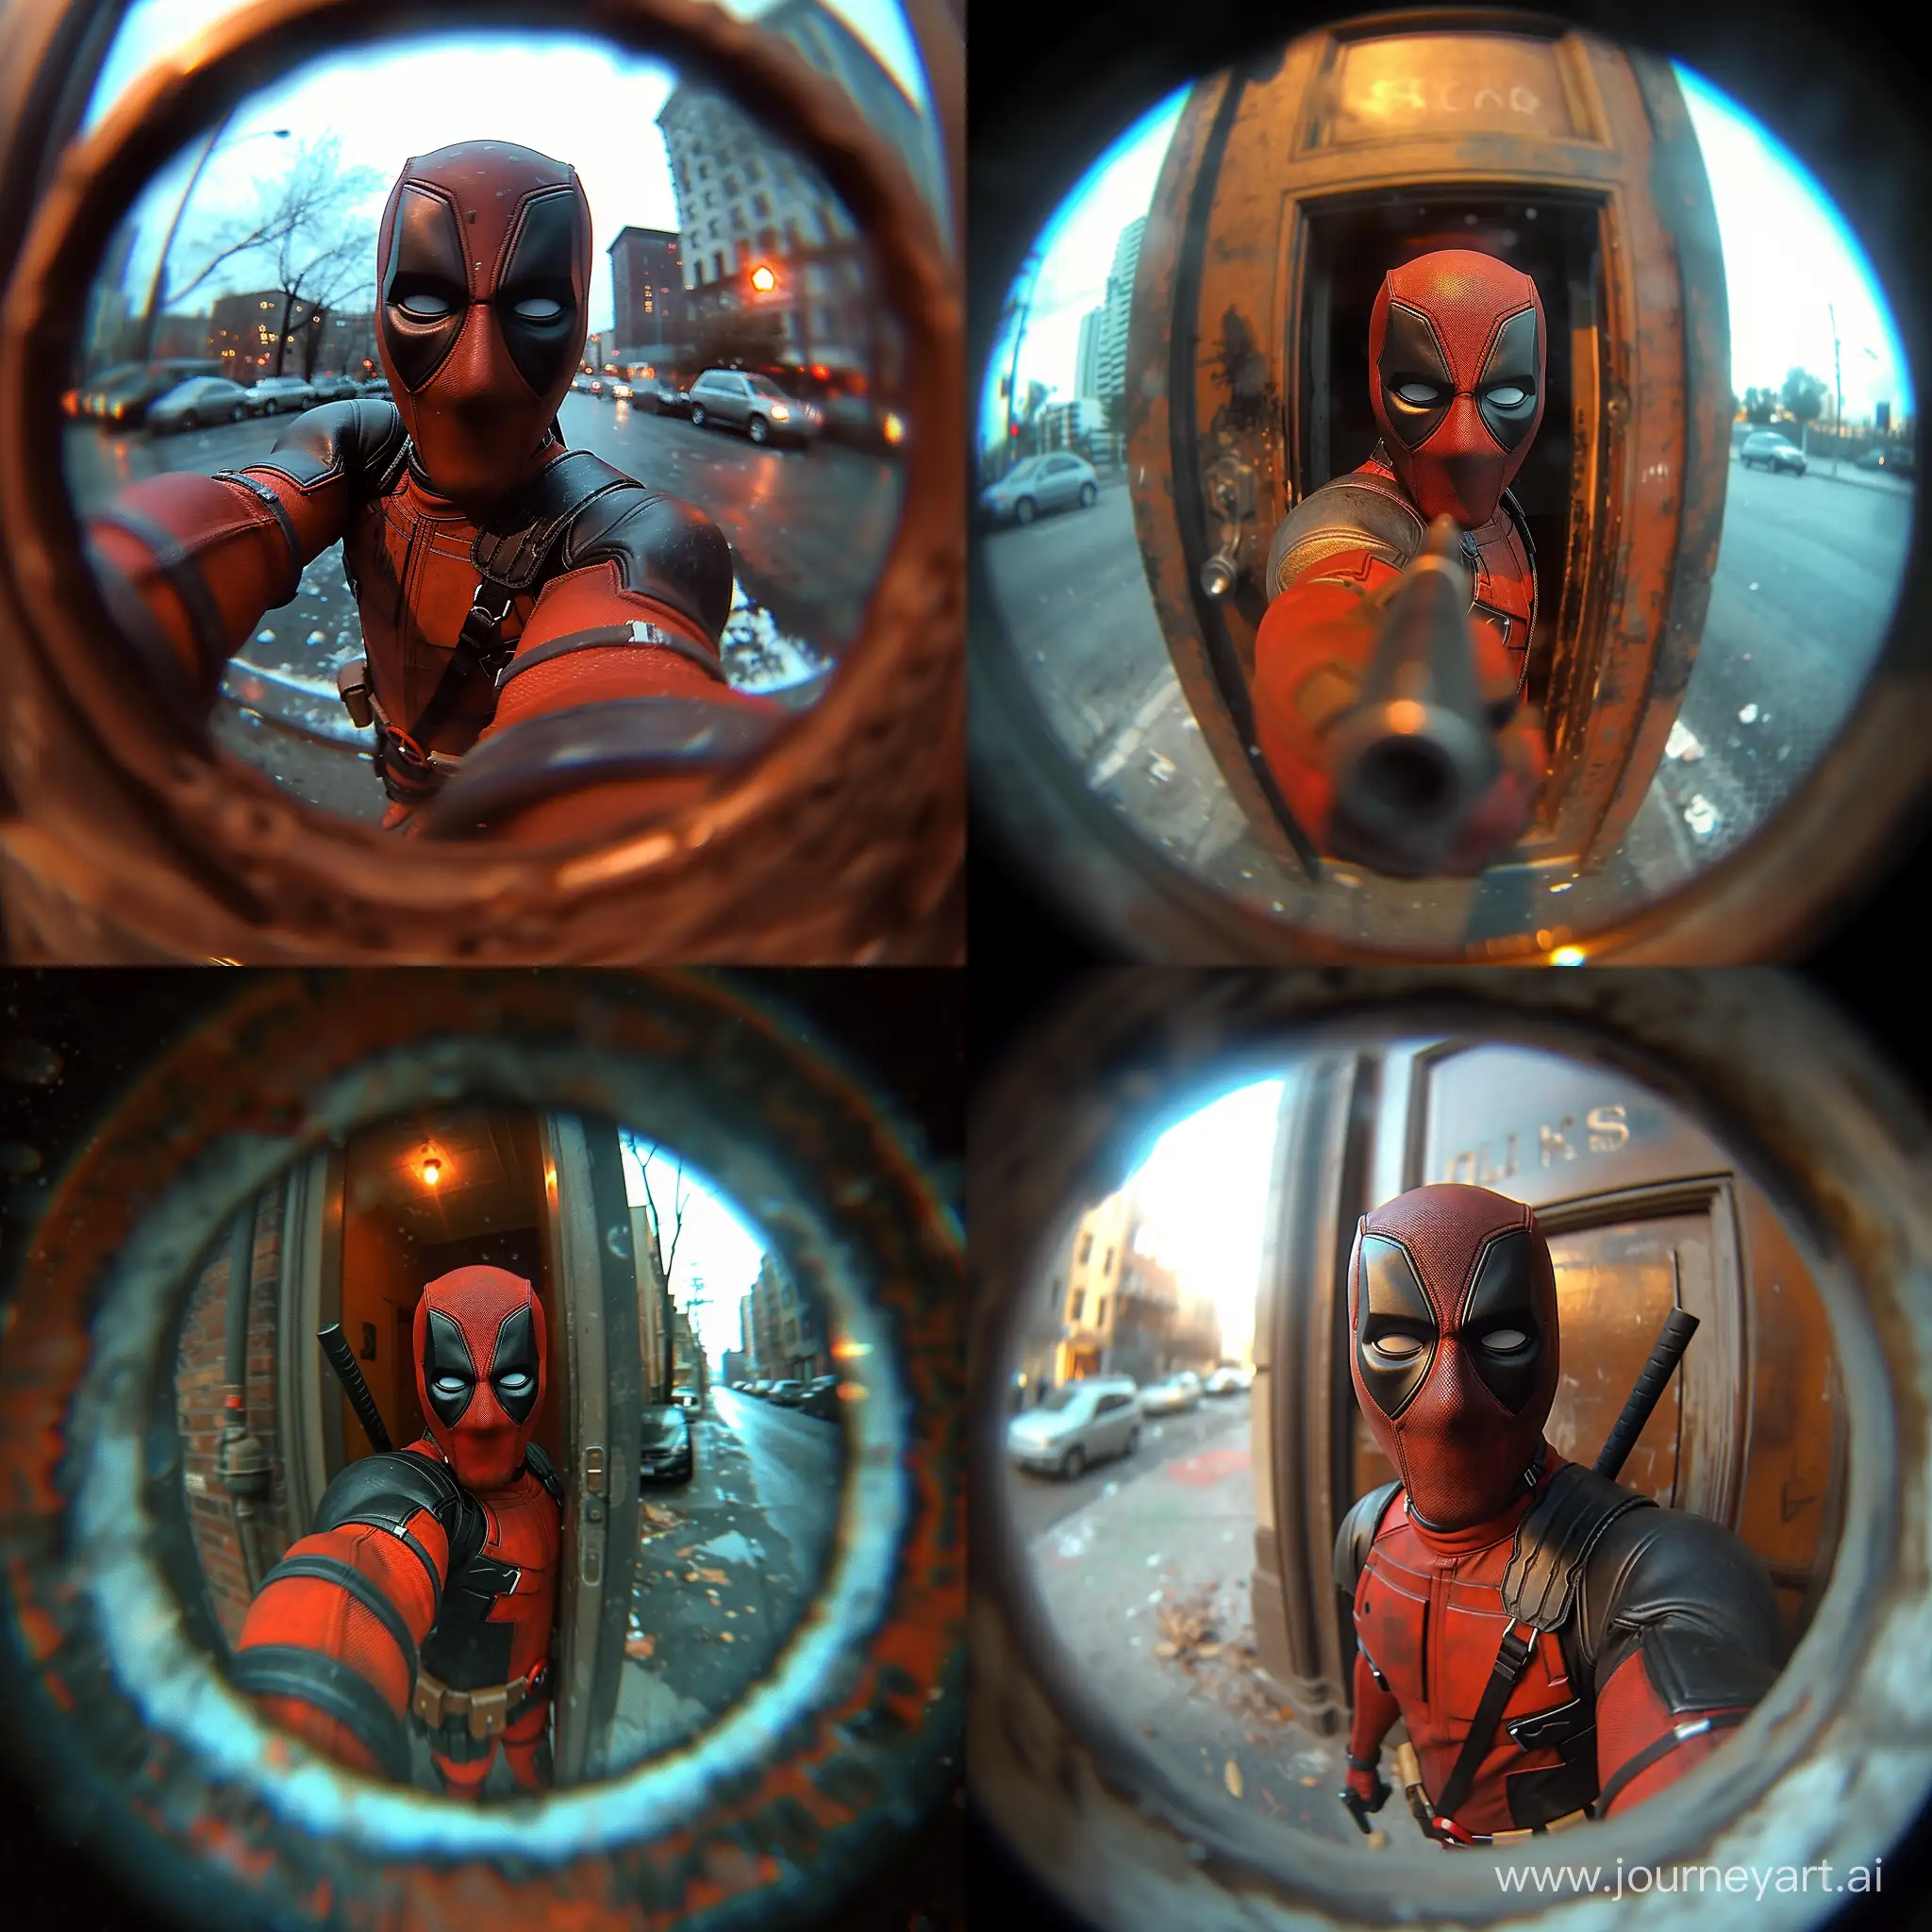 Magic eye short of Deadpool, he is being seen through the peephole of a door, he aim a gun to the peephole of a door, american city street background, take with GoPro HERO9 Black camera with GoPro Super Suit Dive Housing. --sref https://s.mj.run/PWoUeoFu2Qk --stylize 750 